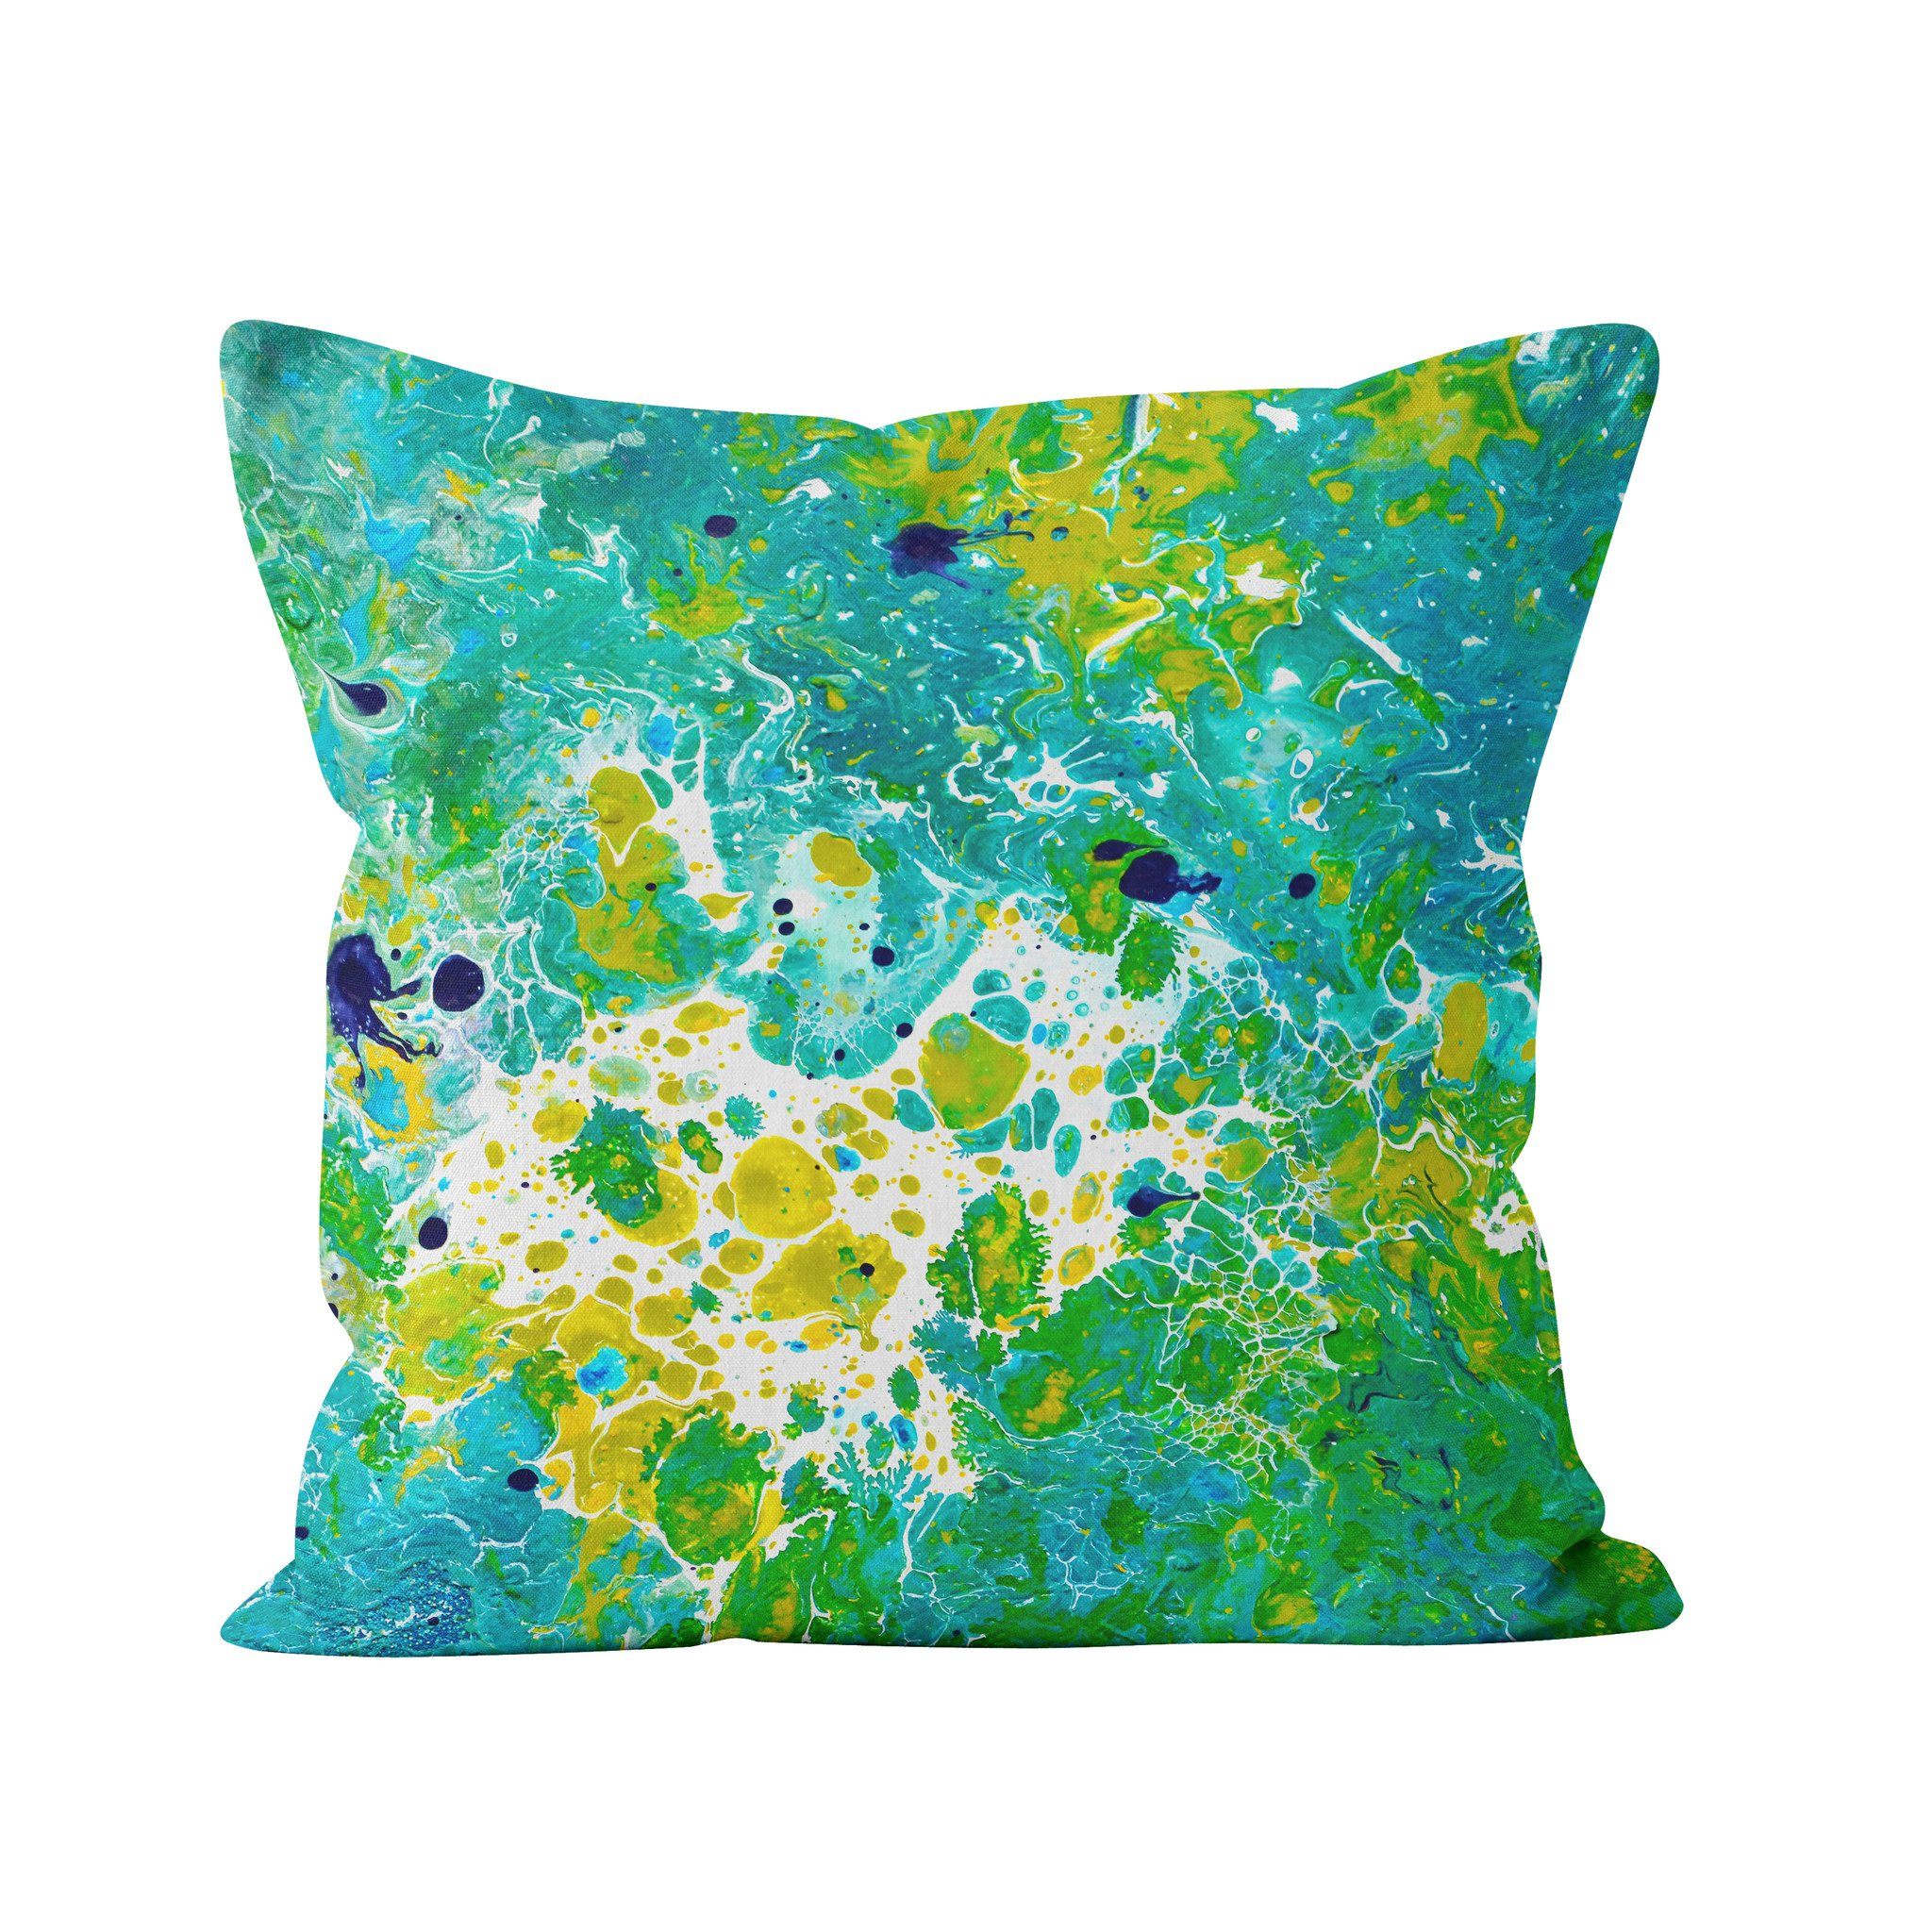 Teal & Green Square Pillow - Louise Mead